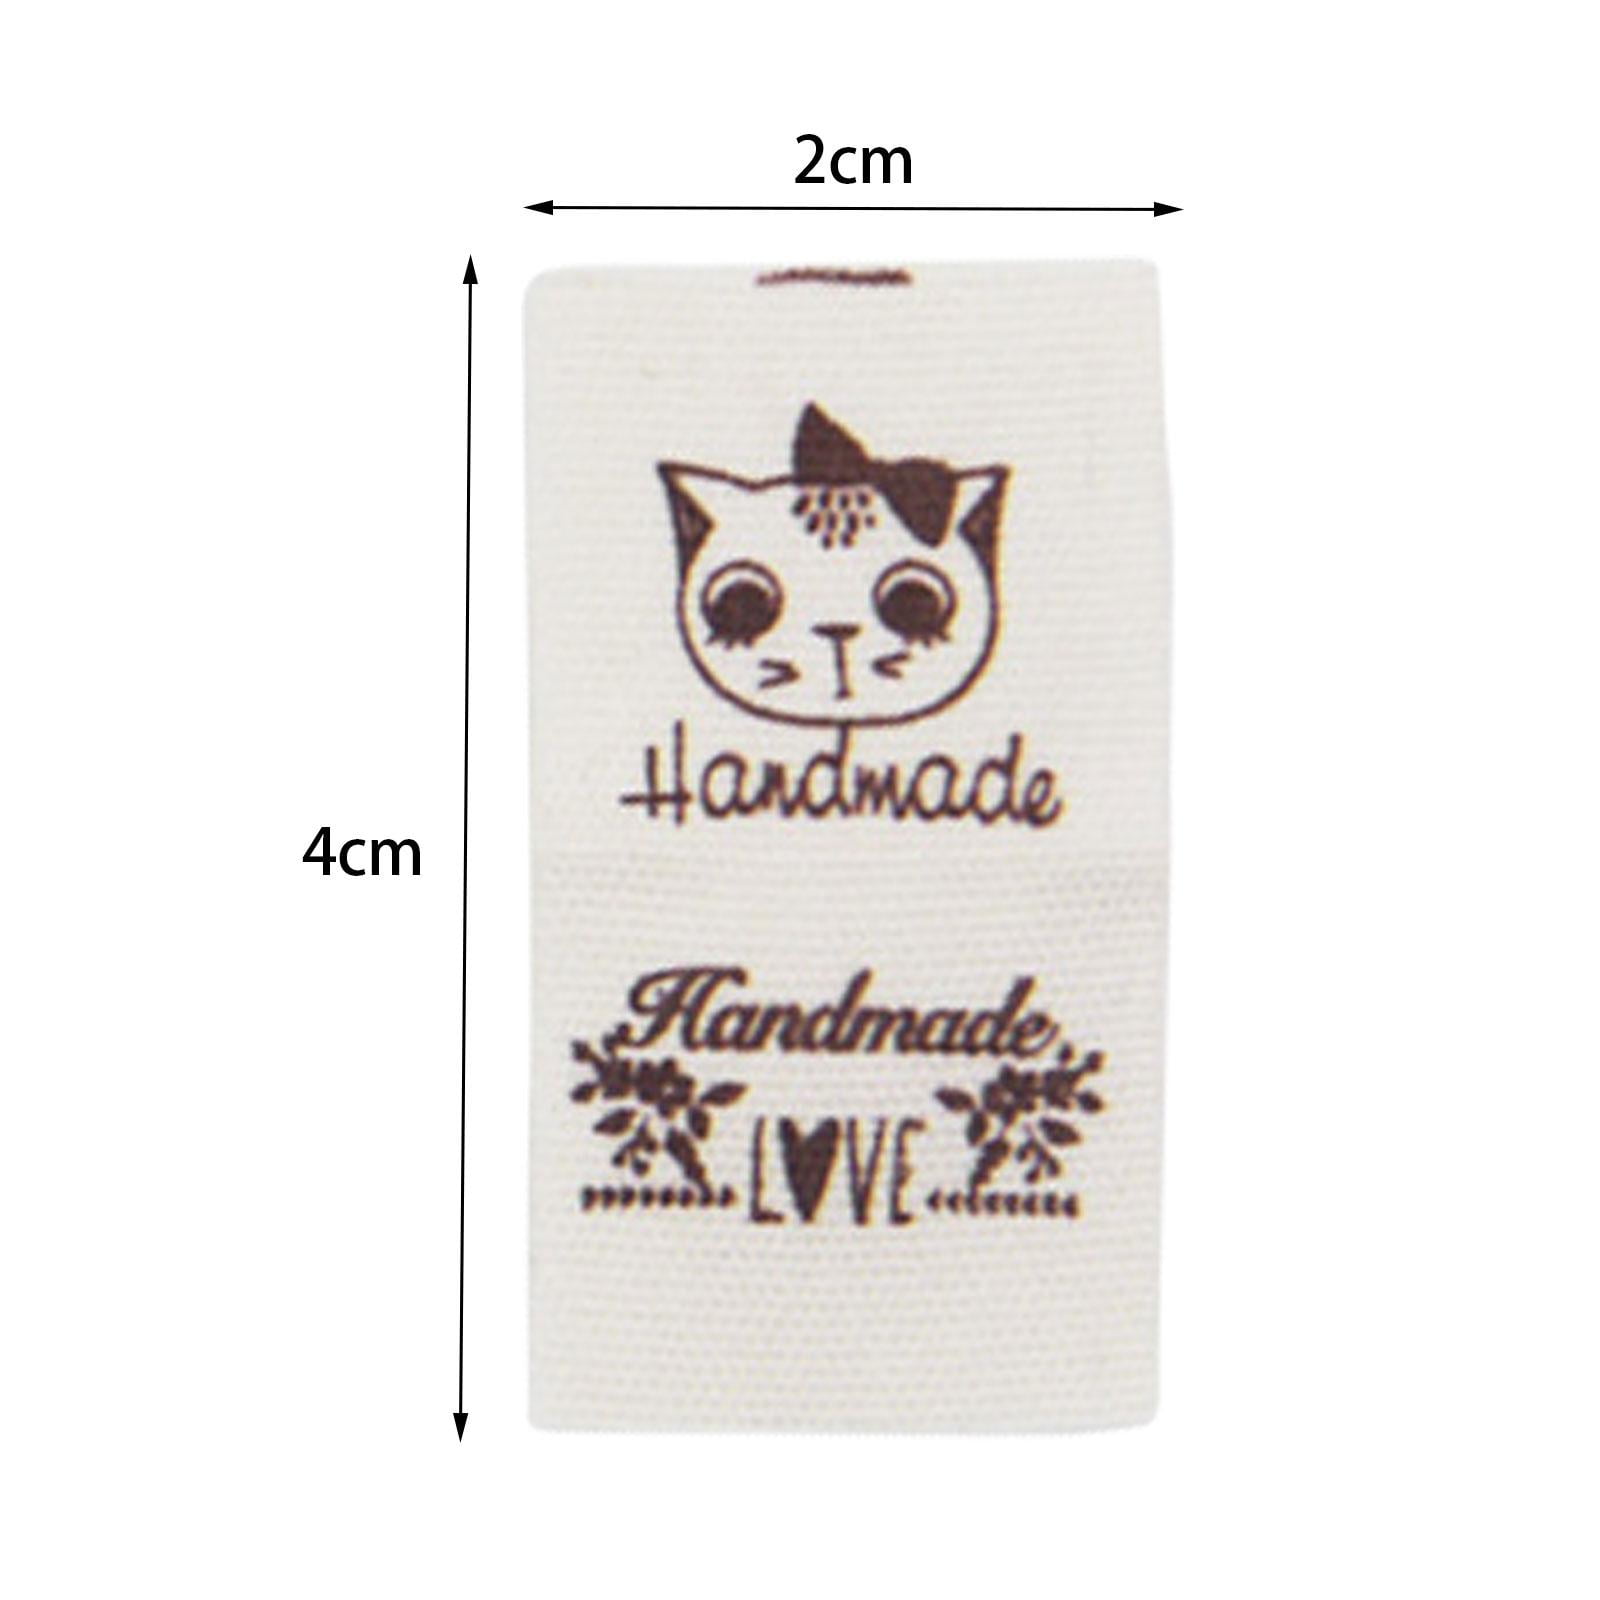 100x Handmade Bear Woven Folded Label for DIY Clothes Tags Sewing